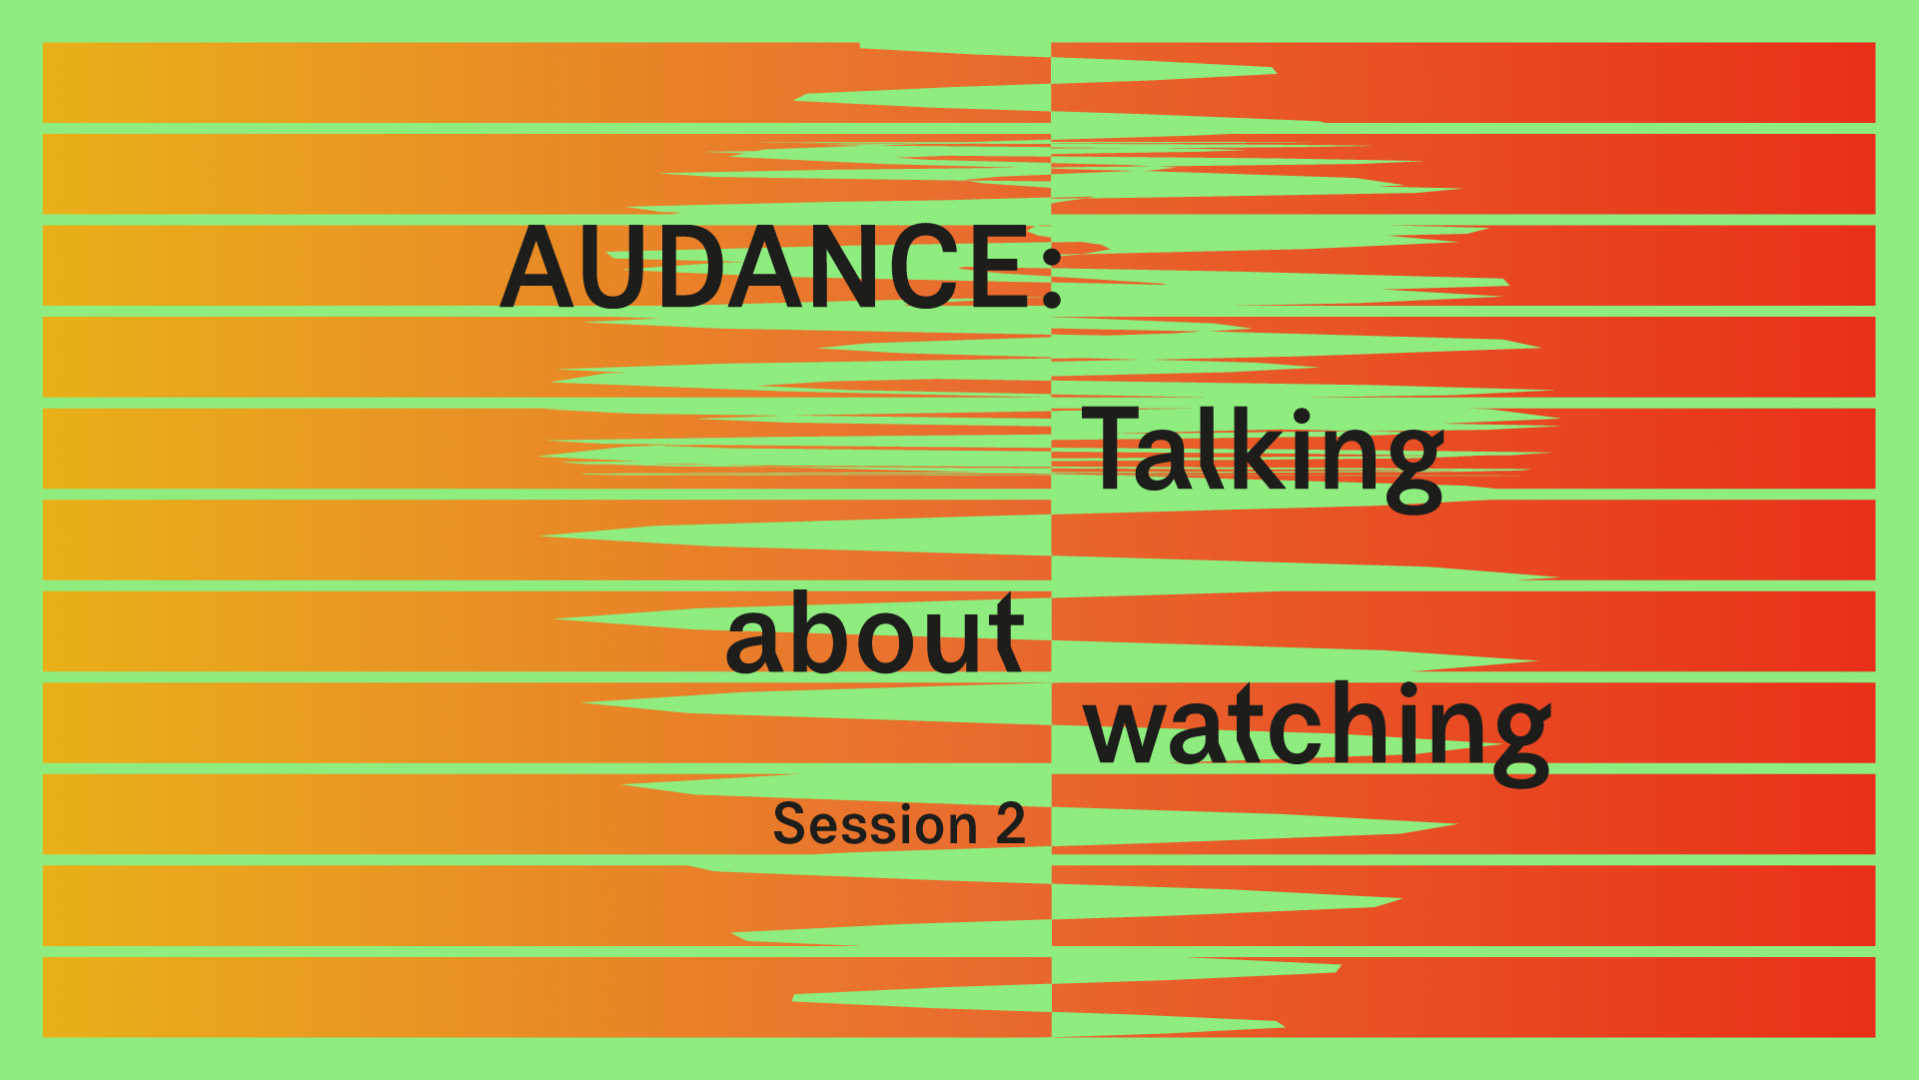 PLAST: AUDANCE: TALKING ABOUT WATCHING SESSION 2